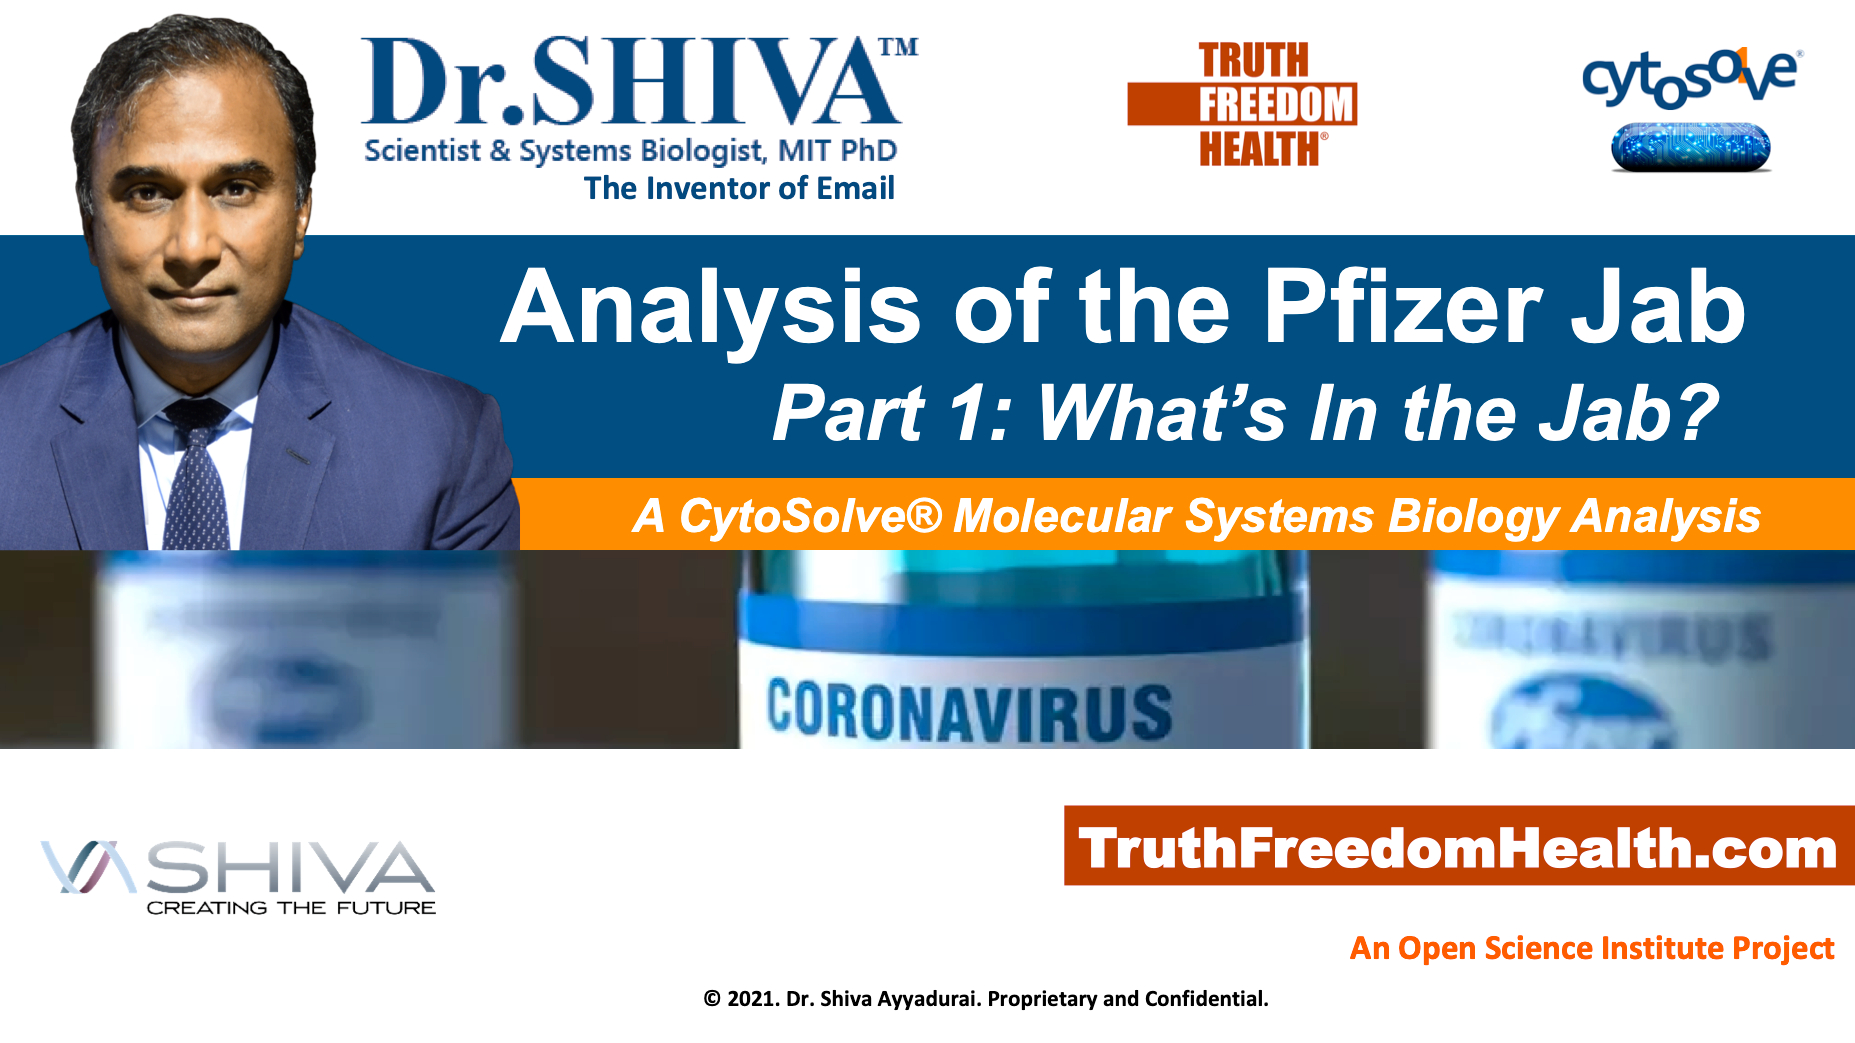 Dr.SHIVA LIVE: Pfizer Jab Analysis: What's in It? Part 1. CytoSolve Open Science